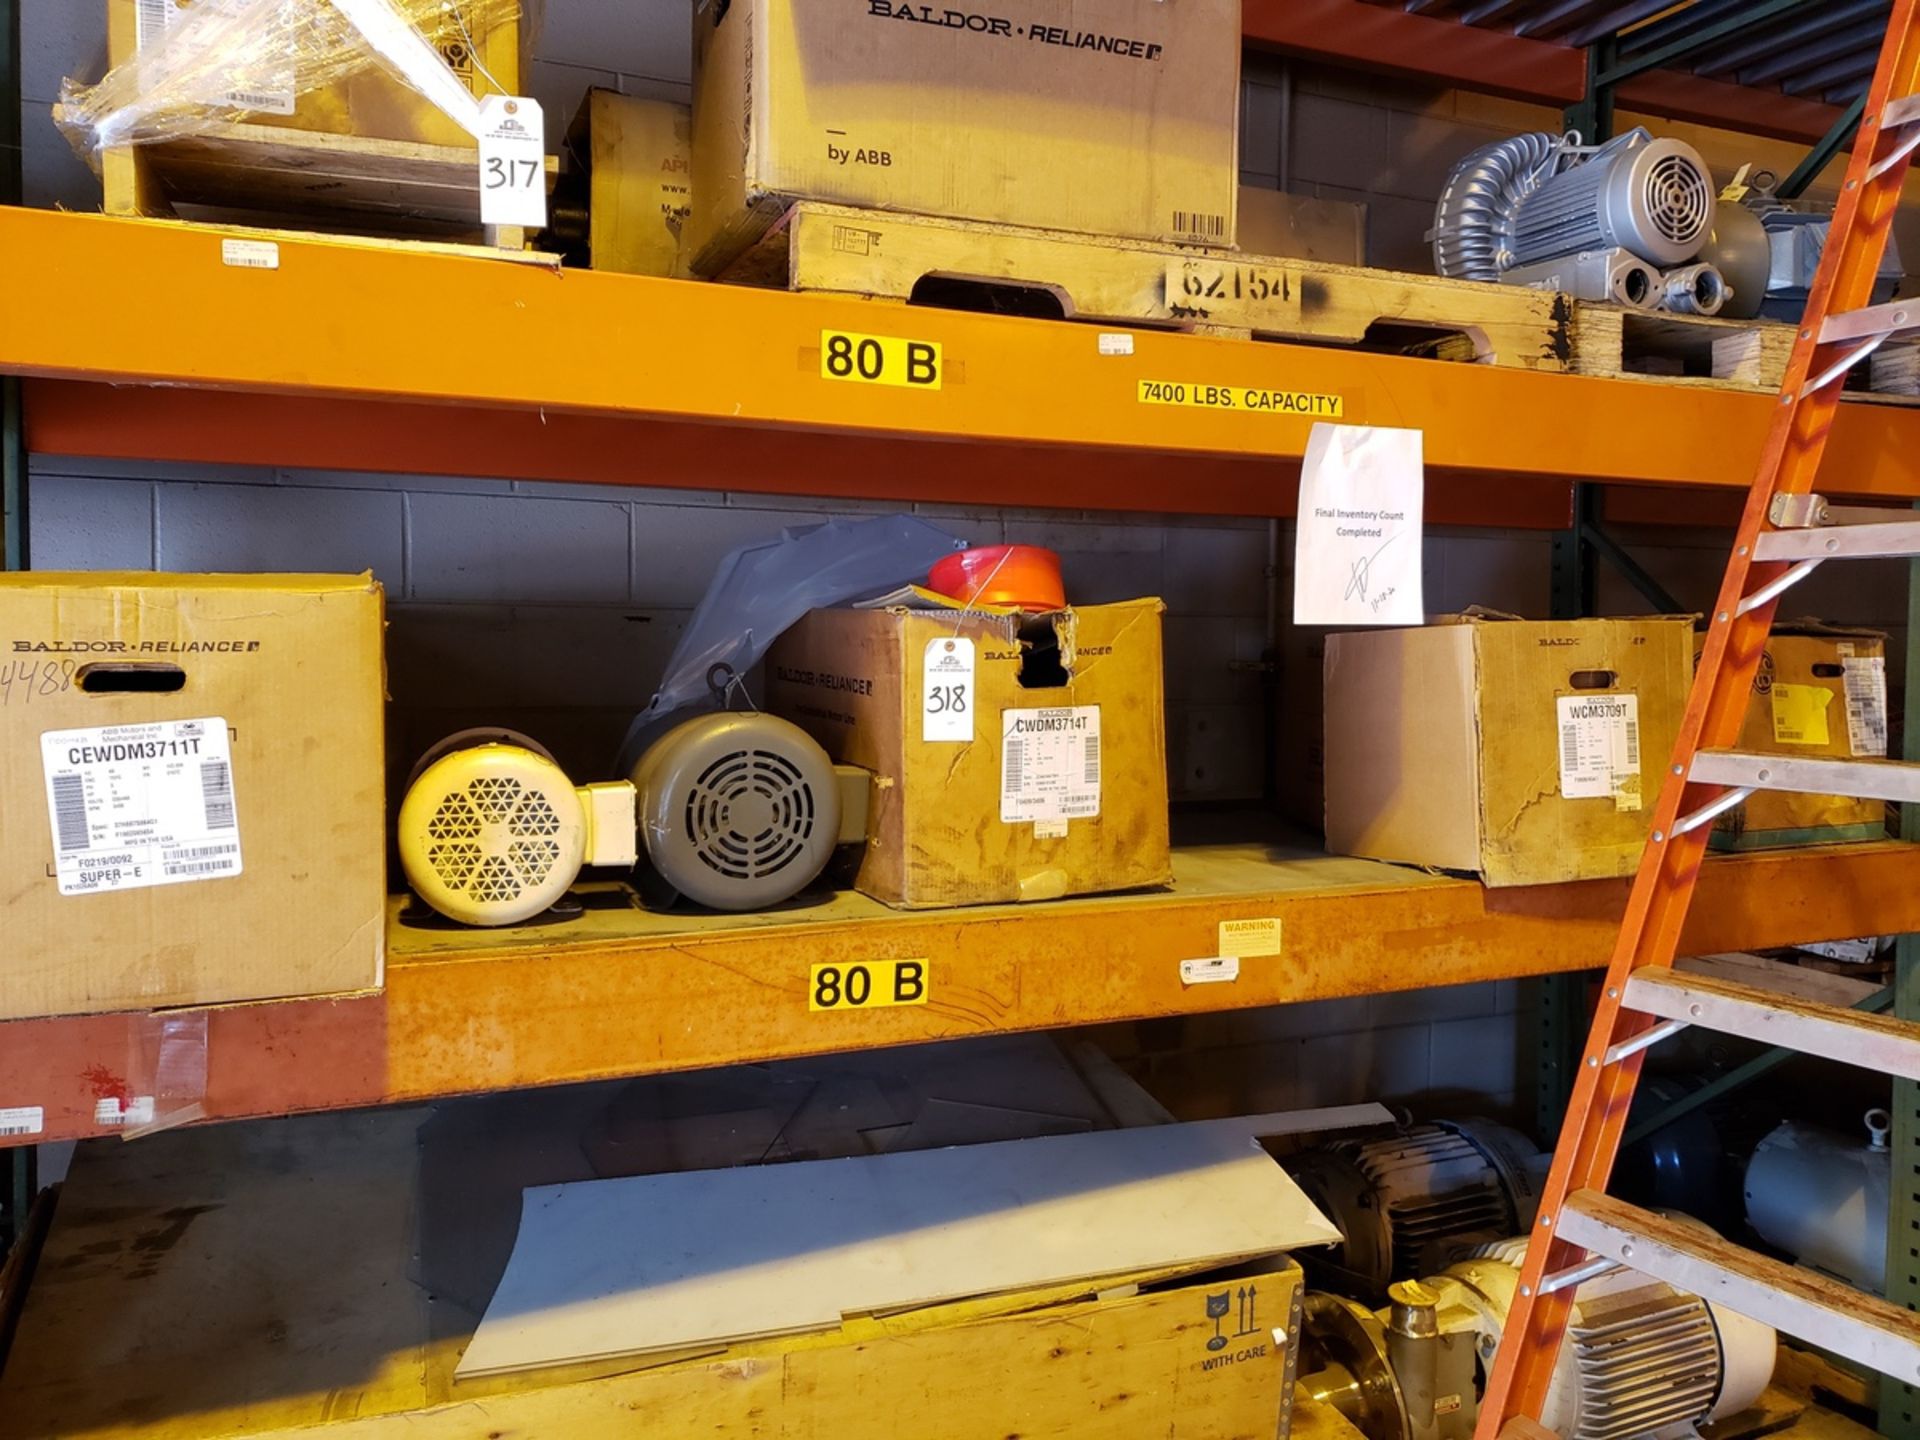 Contents of Pallet Rack Section, Spare Motors - Subj to Bulks | Reqd Rig Fee: $100